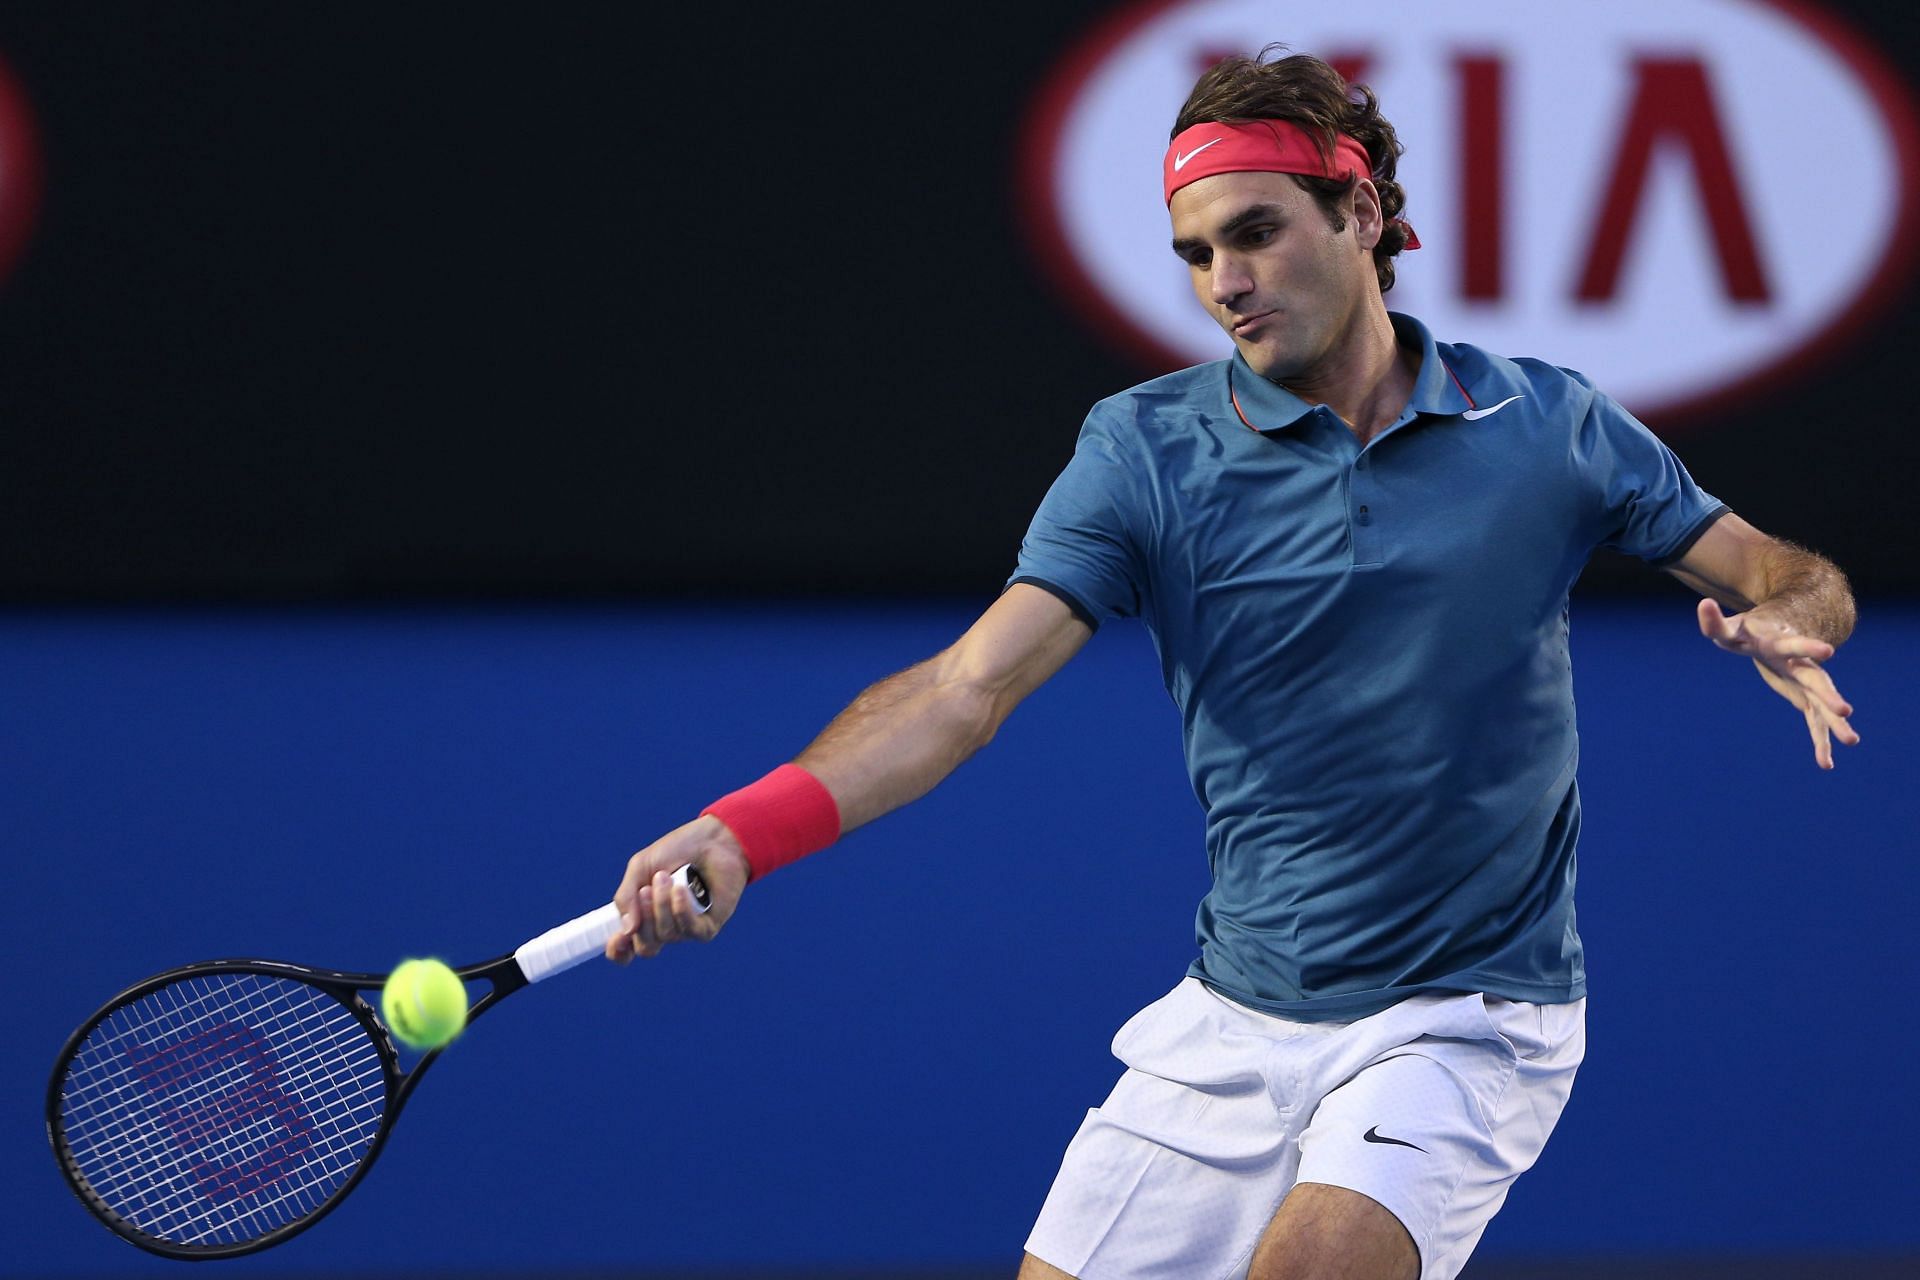 Roger Federer during his match with Rafael Nadal at the 2014 Australian Open